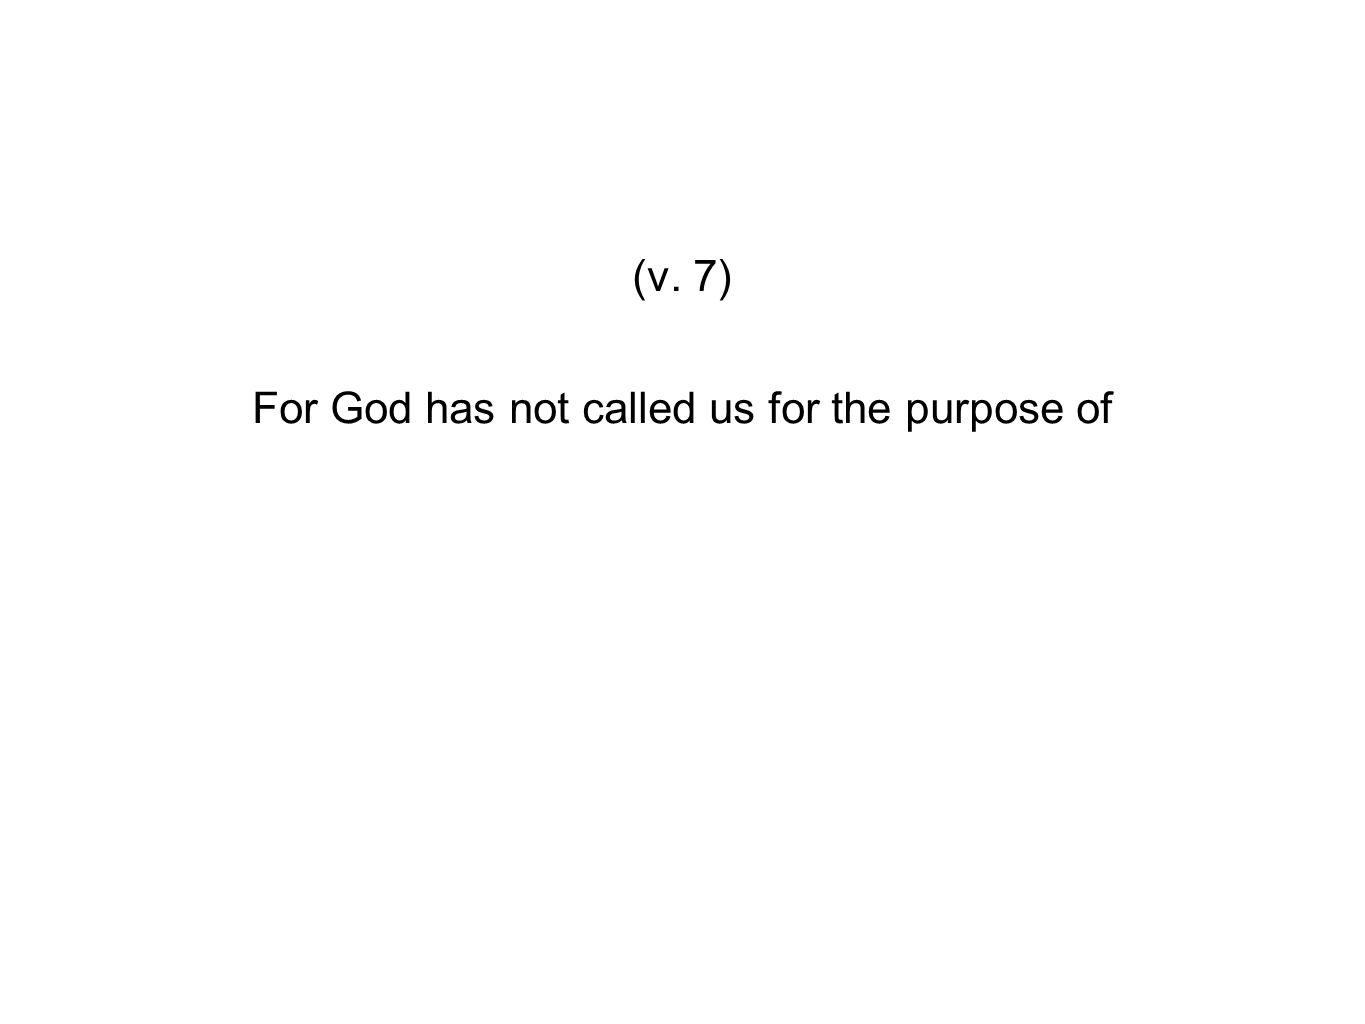 For God has not called us for the purpose of